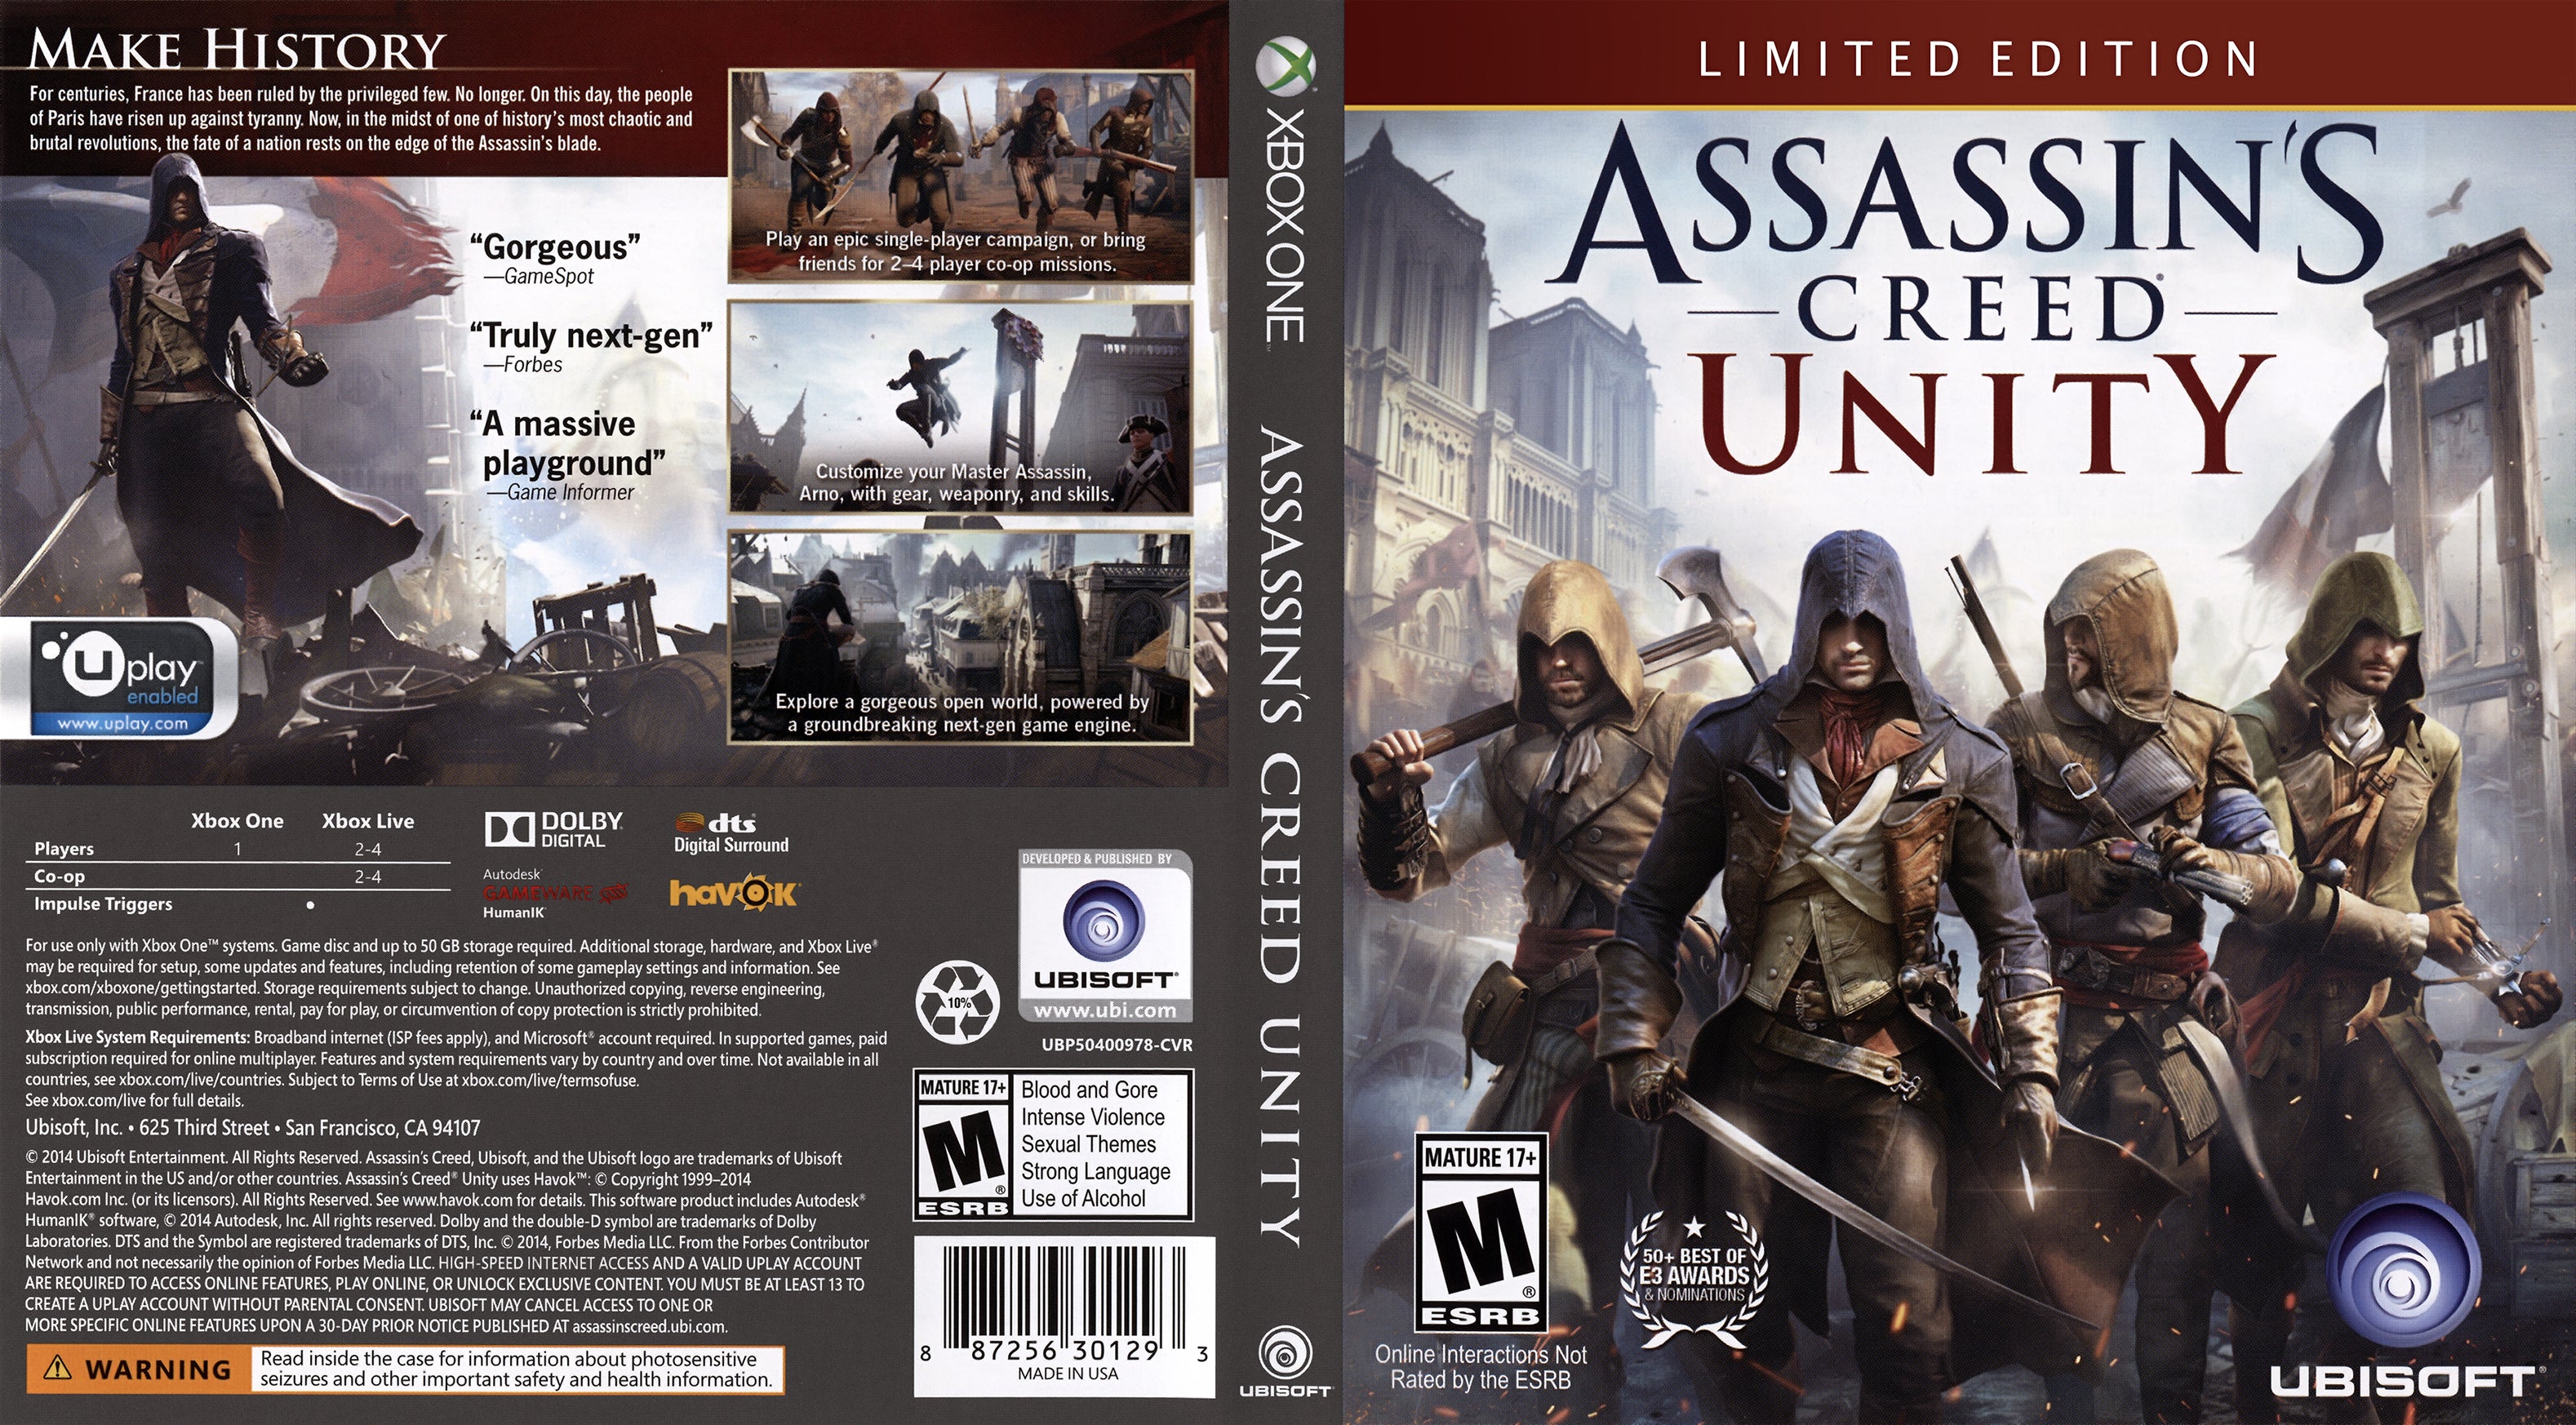 Assassins игра xbox. Assassins Creed xbox360 Cover. AC Unity ps3. Ассасин Крид Юнити на Xbox 360. Assassin's Creed 1 Xbox 360 обложка.